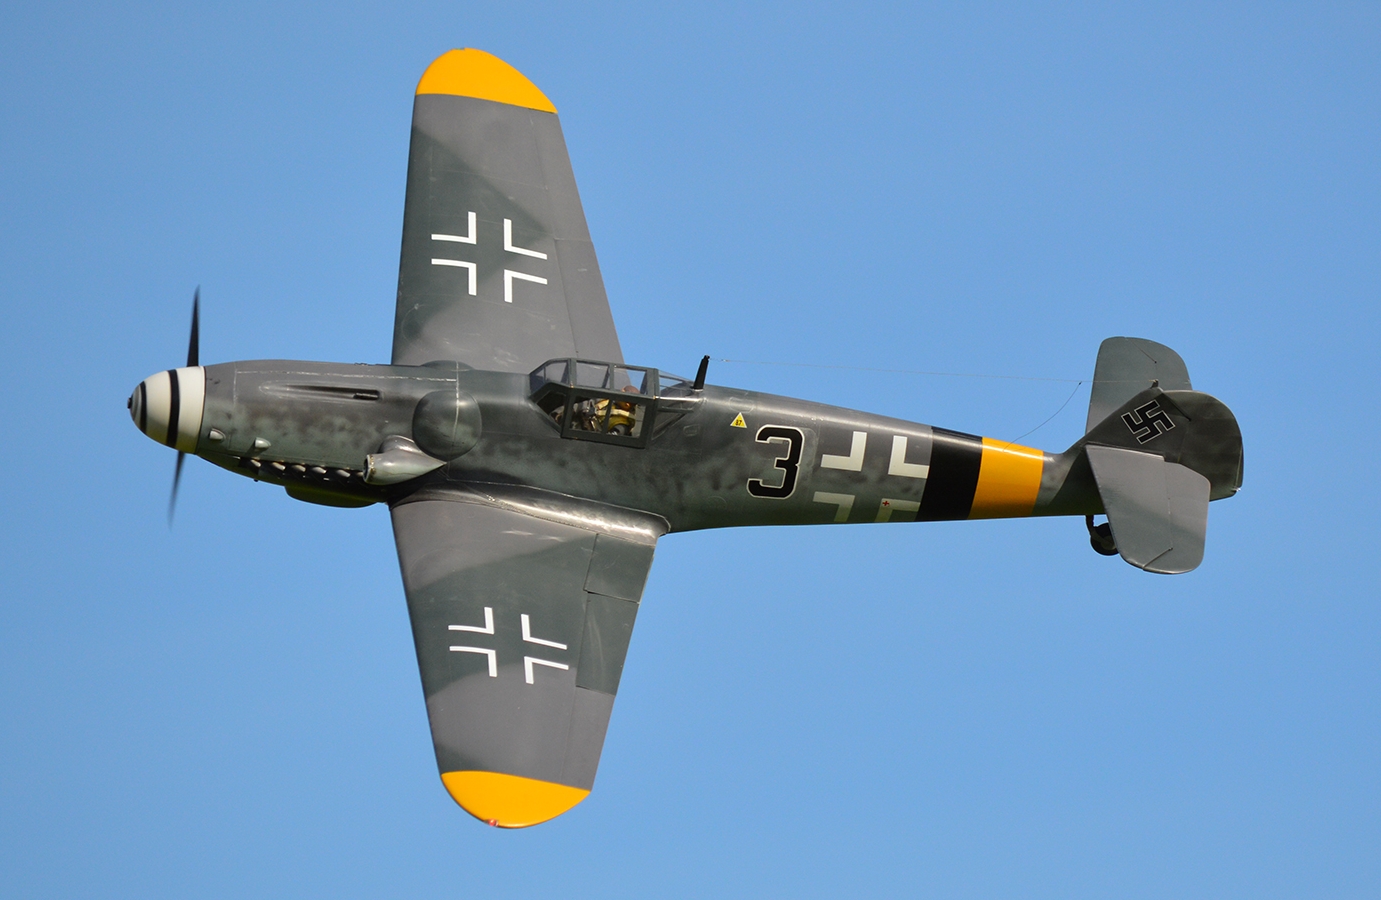  Dave Platt Bf109. Powered by Laser 160v    built by Trond Backmann - Norway